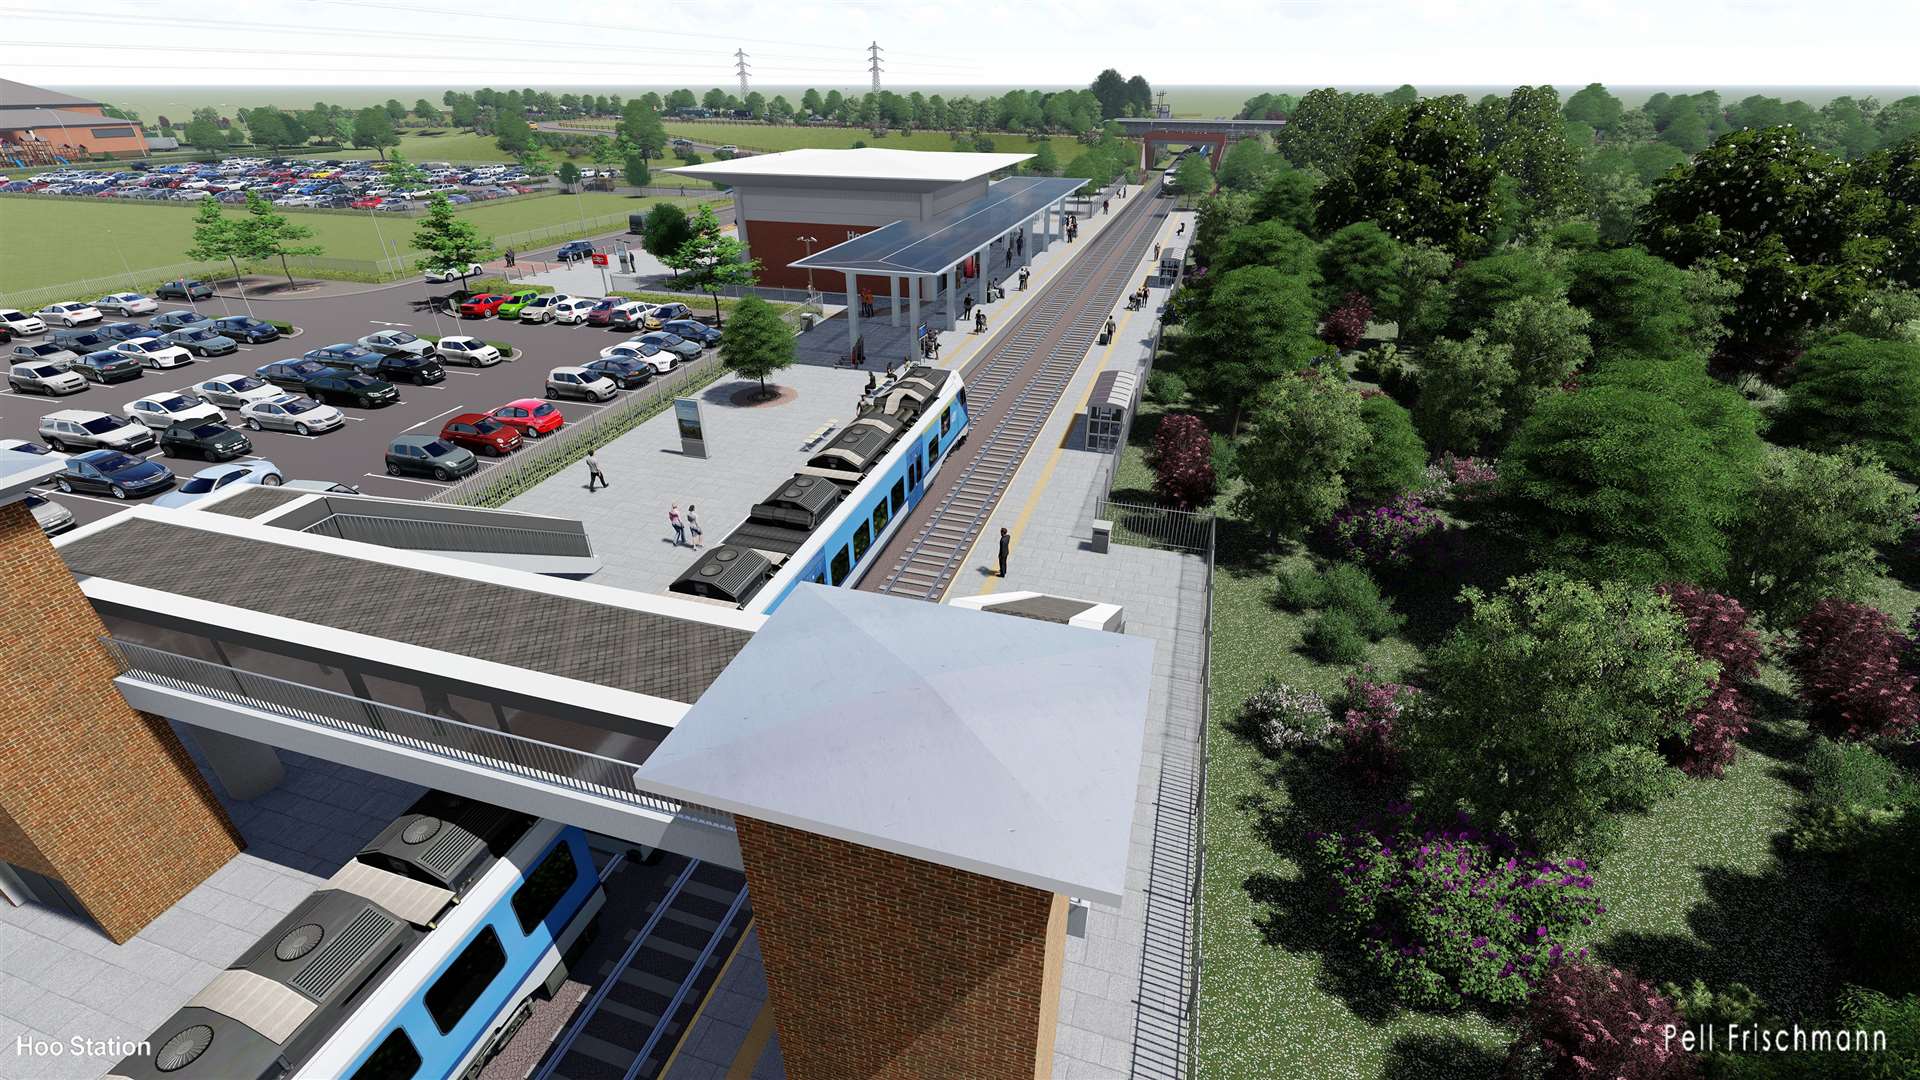 Proposals for a new £63m station at Hoo is part of the huge infrastructure investment plans to develop more than 10,000 homes on the peninsula